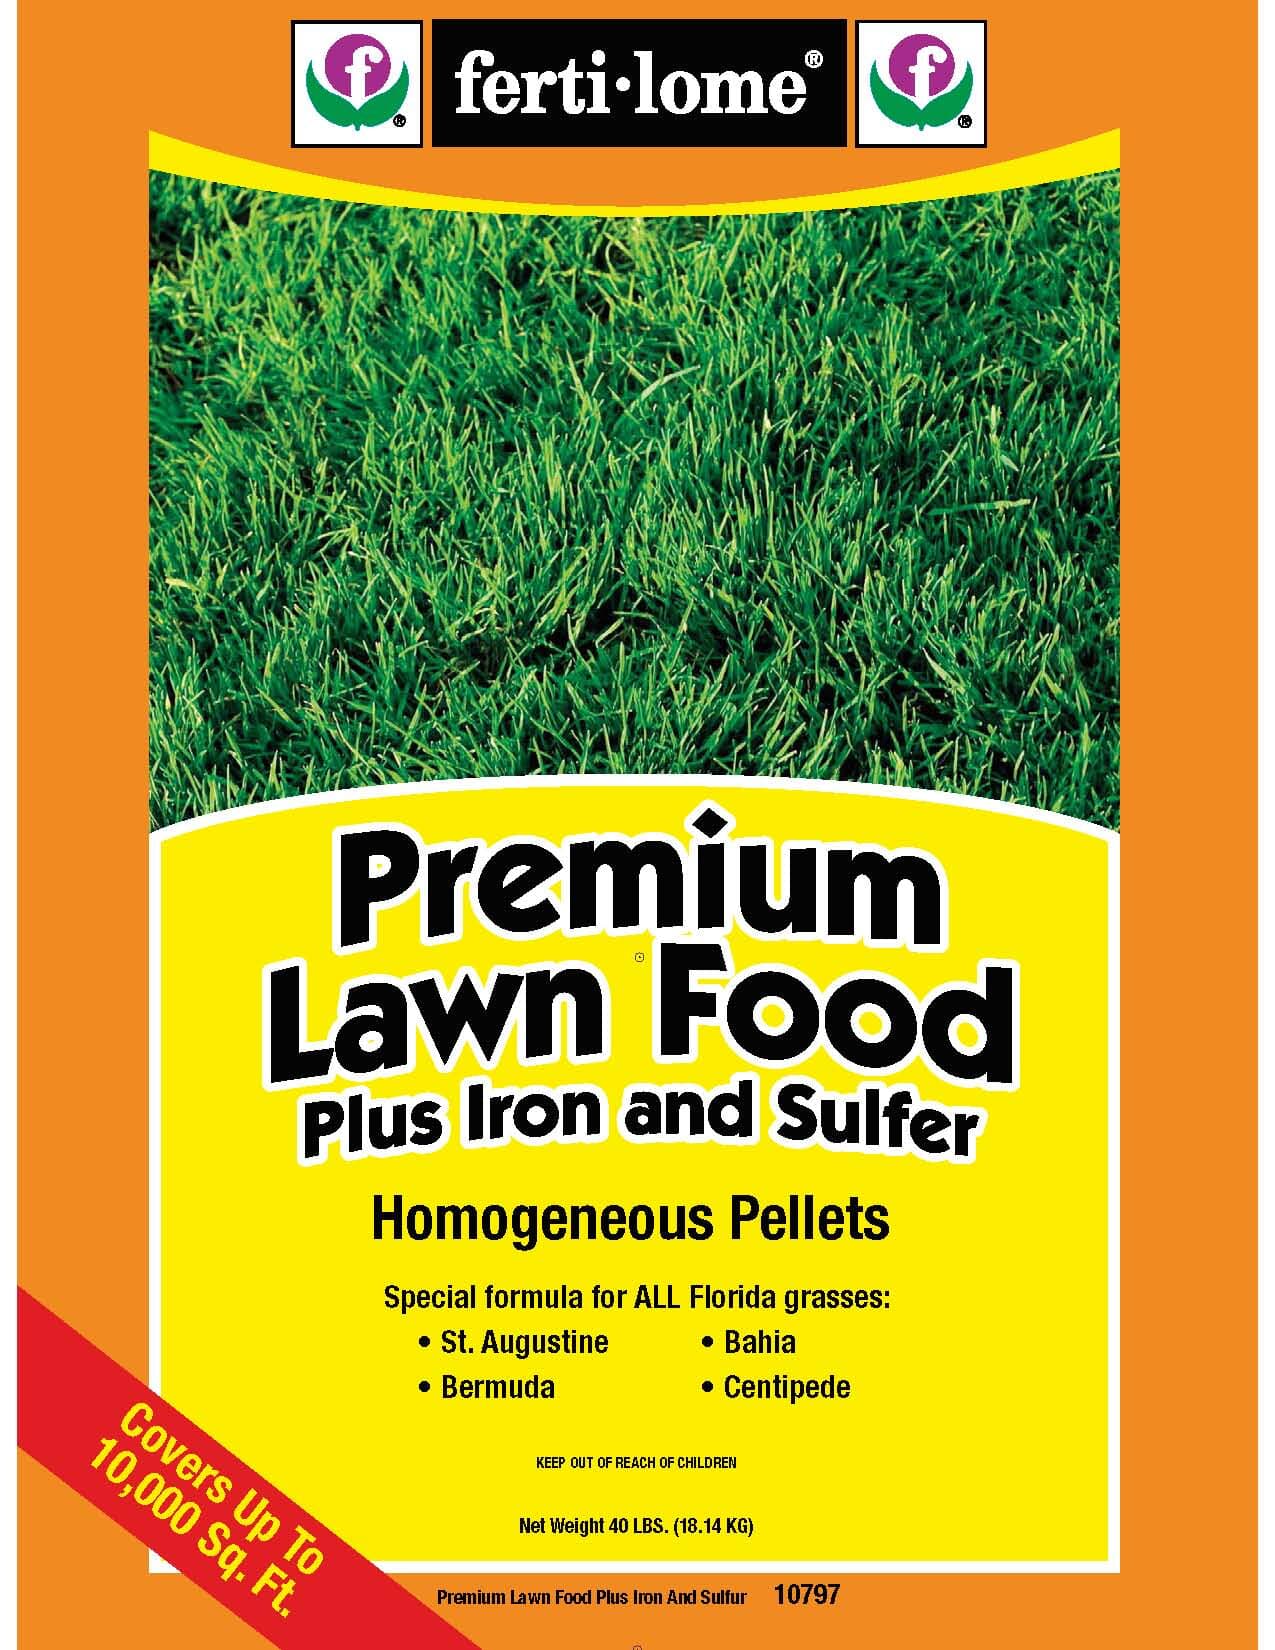 Ferti-lome Premium Lawn Food is specifically design for Bermuda, Bahia, Centipede, and St. Augustine grass.